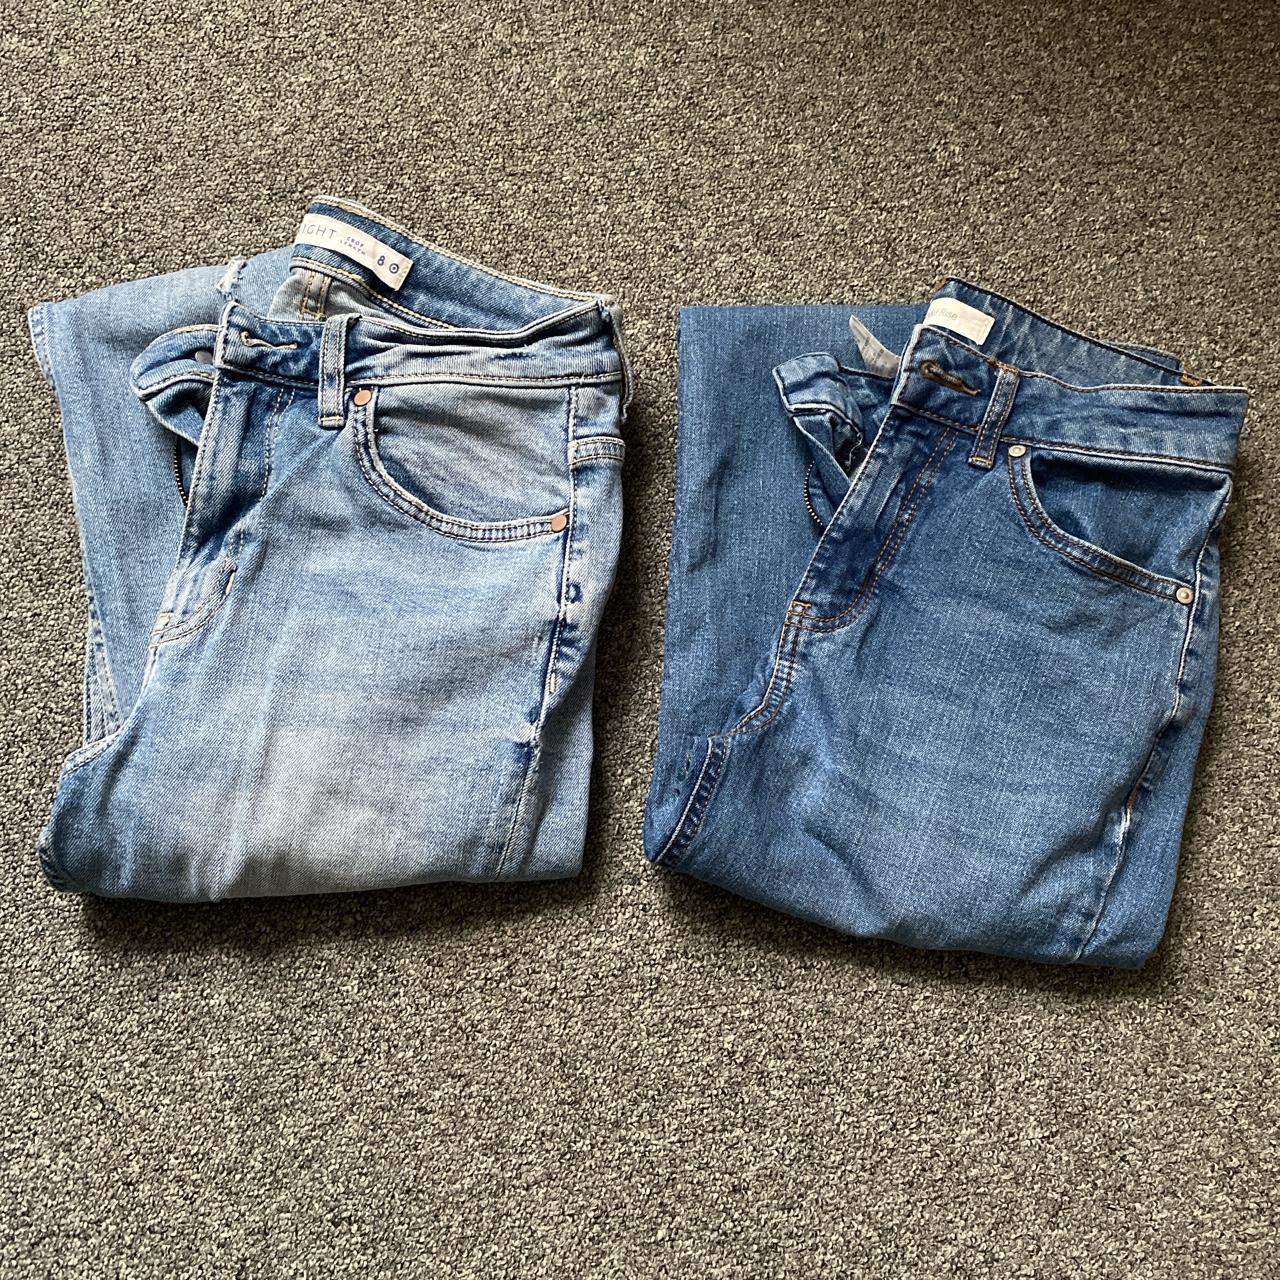 Target and Kmart Jeans. Can give discount, check out - Depop